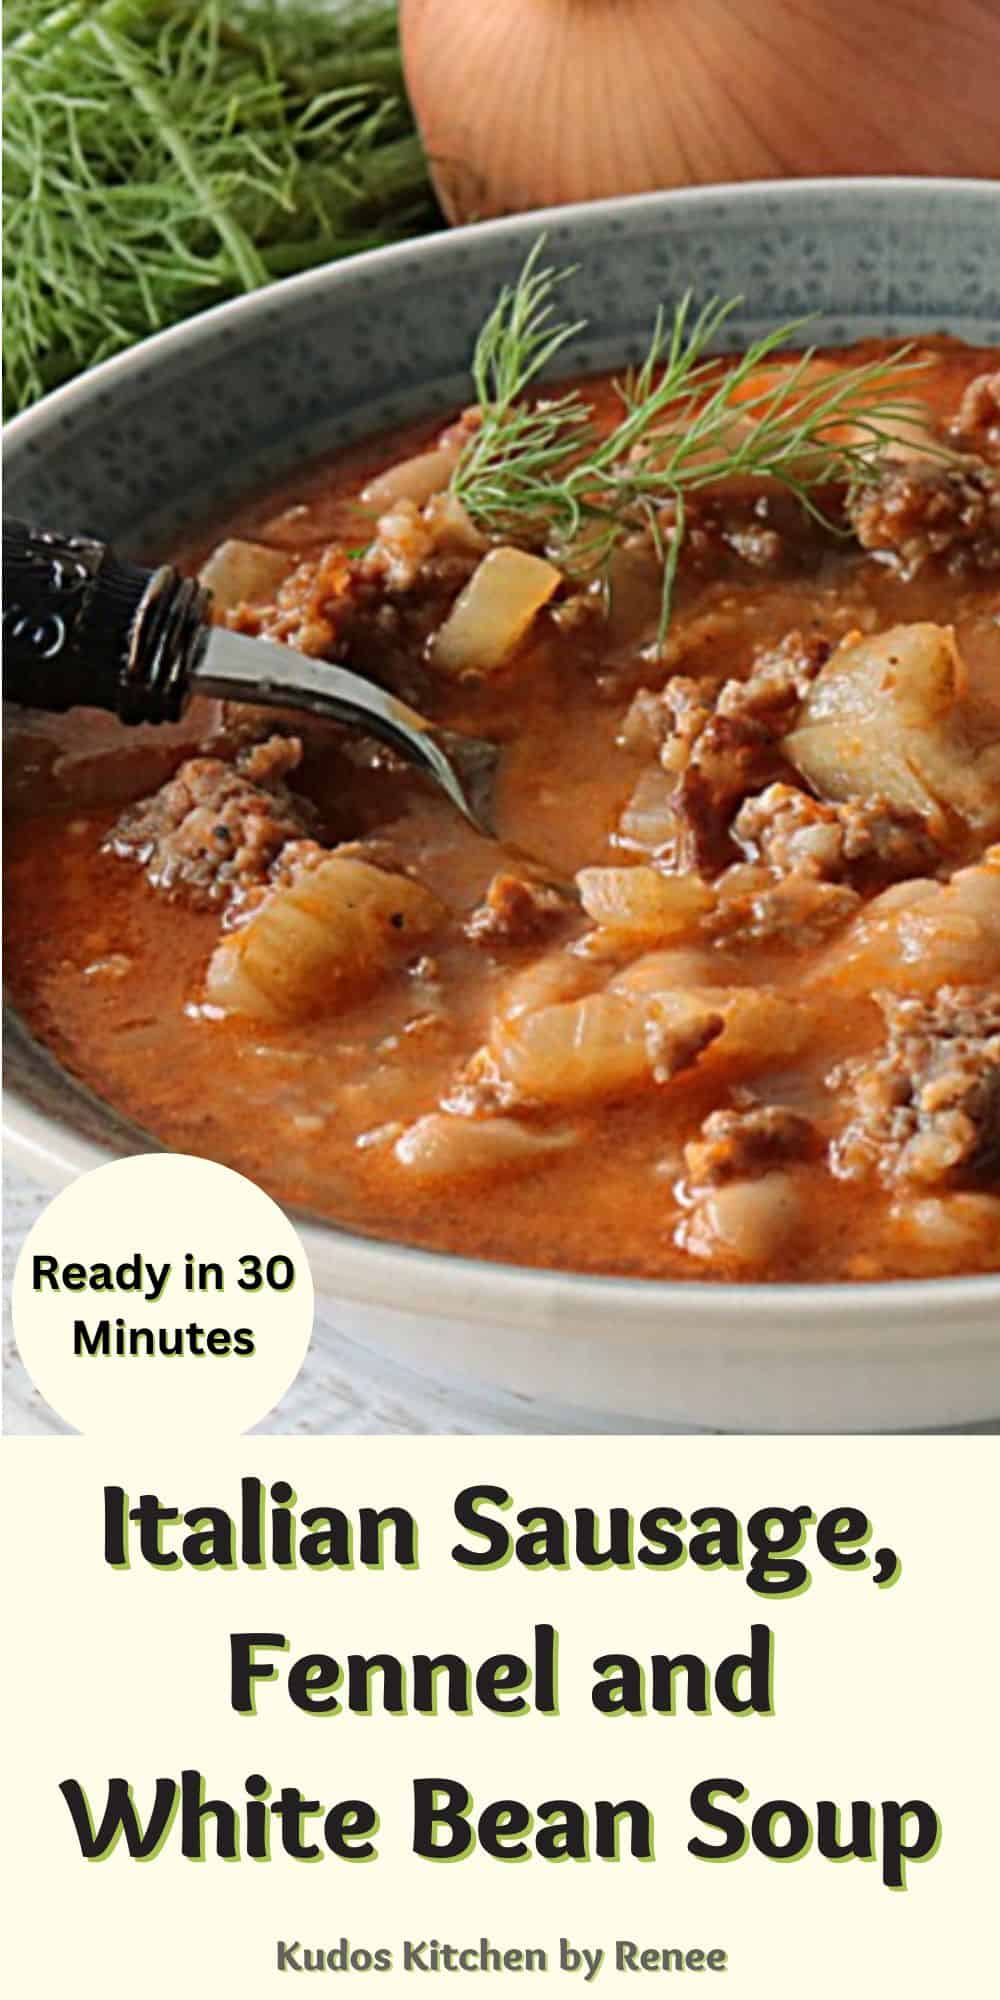 A Pinterest image for Italian Sausage, Fennel and White Bean Soup.